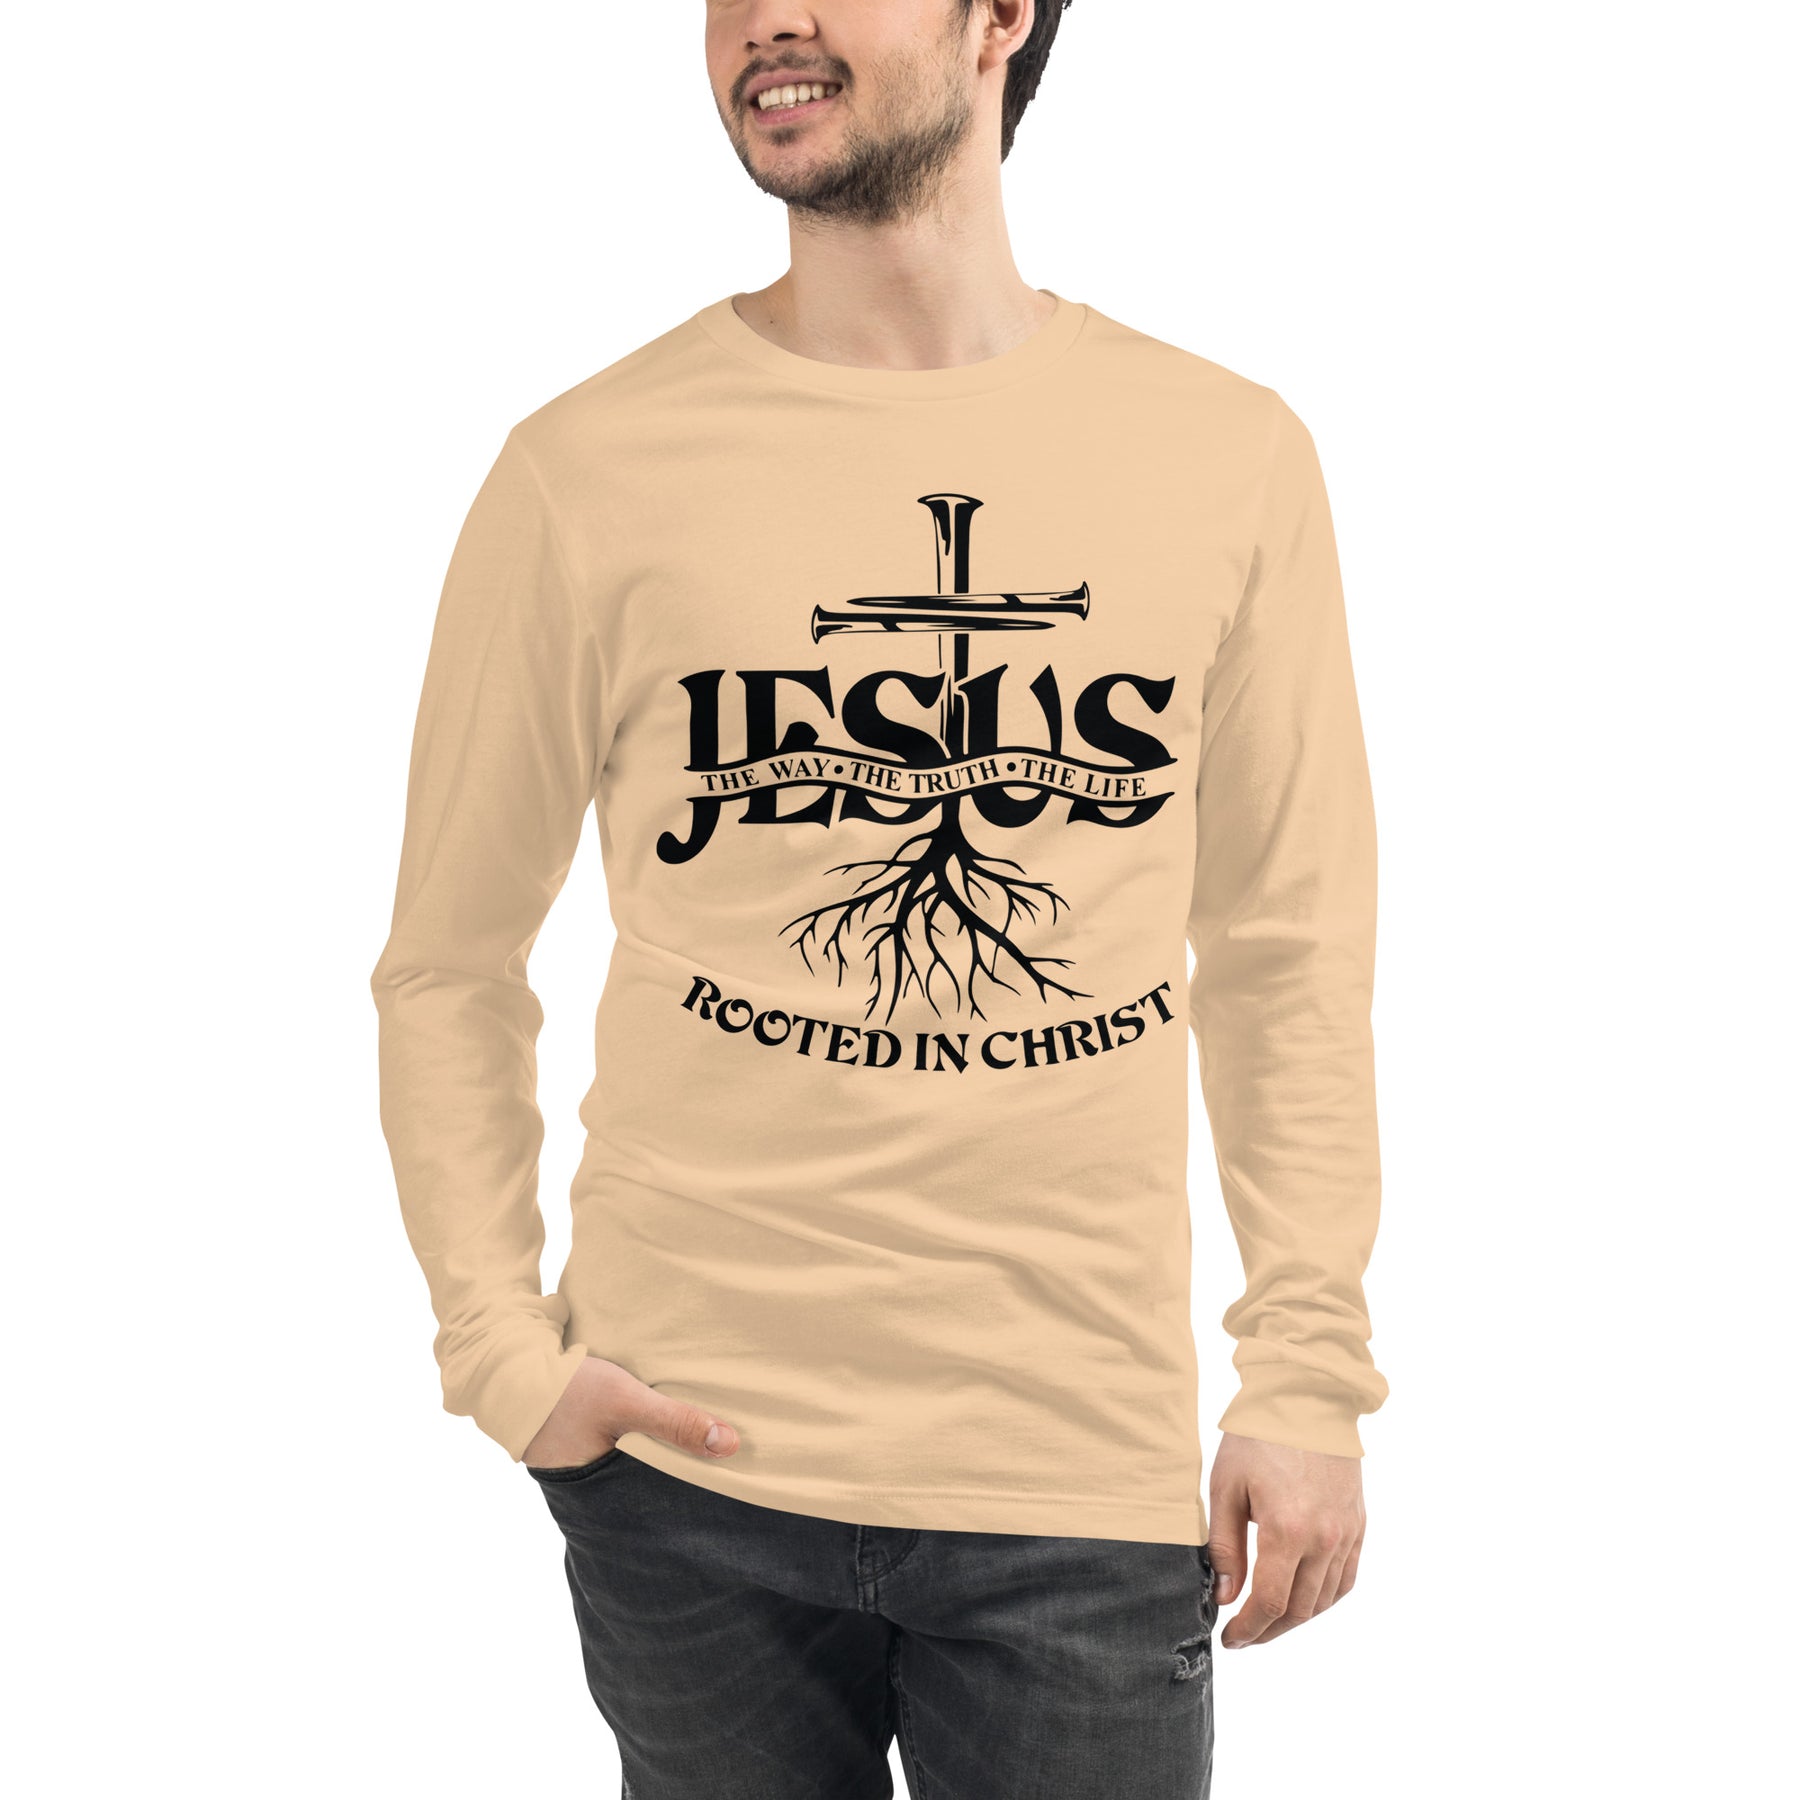 Jesus - Rooted In Christ - Men's Long Sleeve T-Shirt